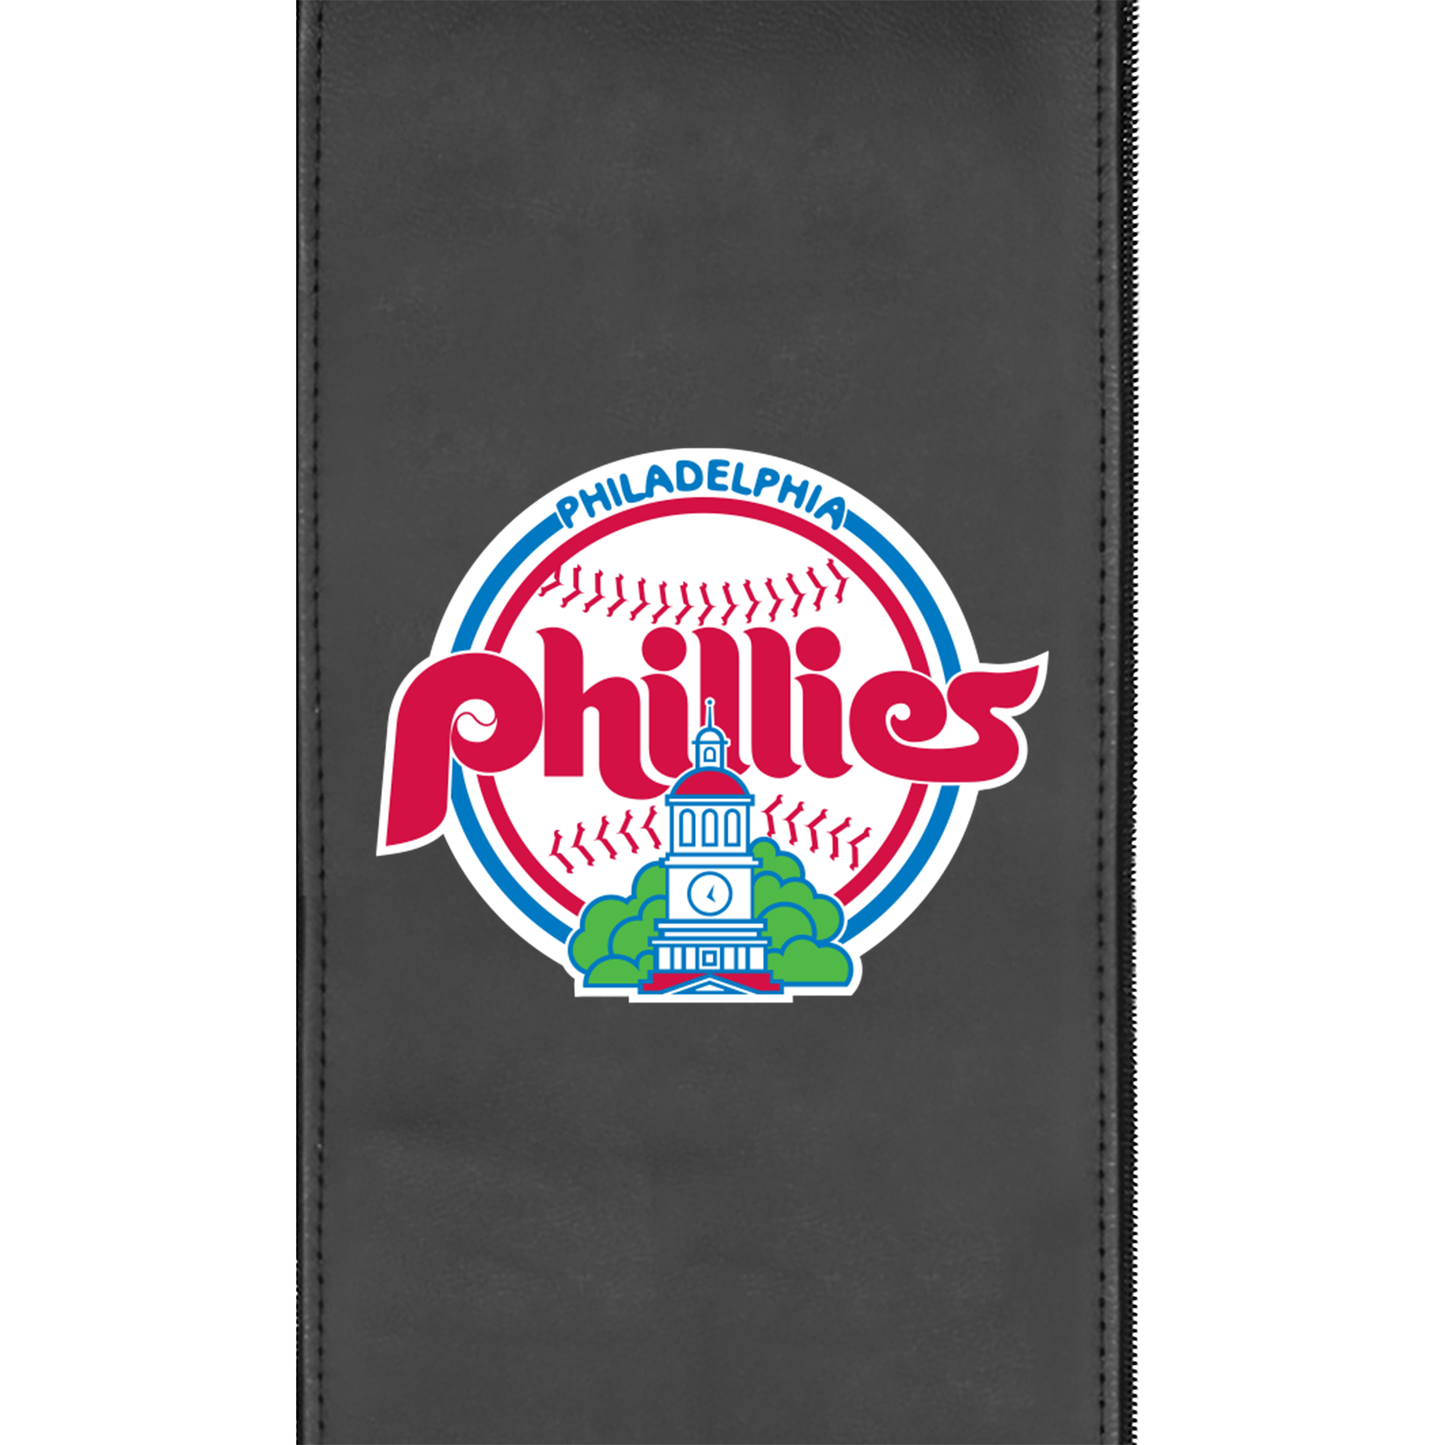 Silver Club Chair with Philadelphia Phillies Cooperstown Primary